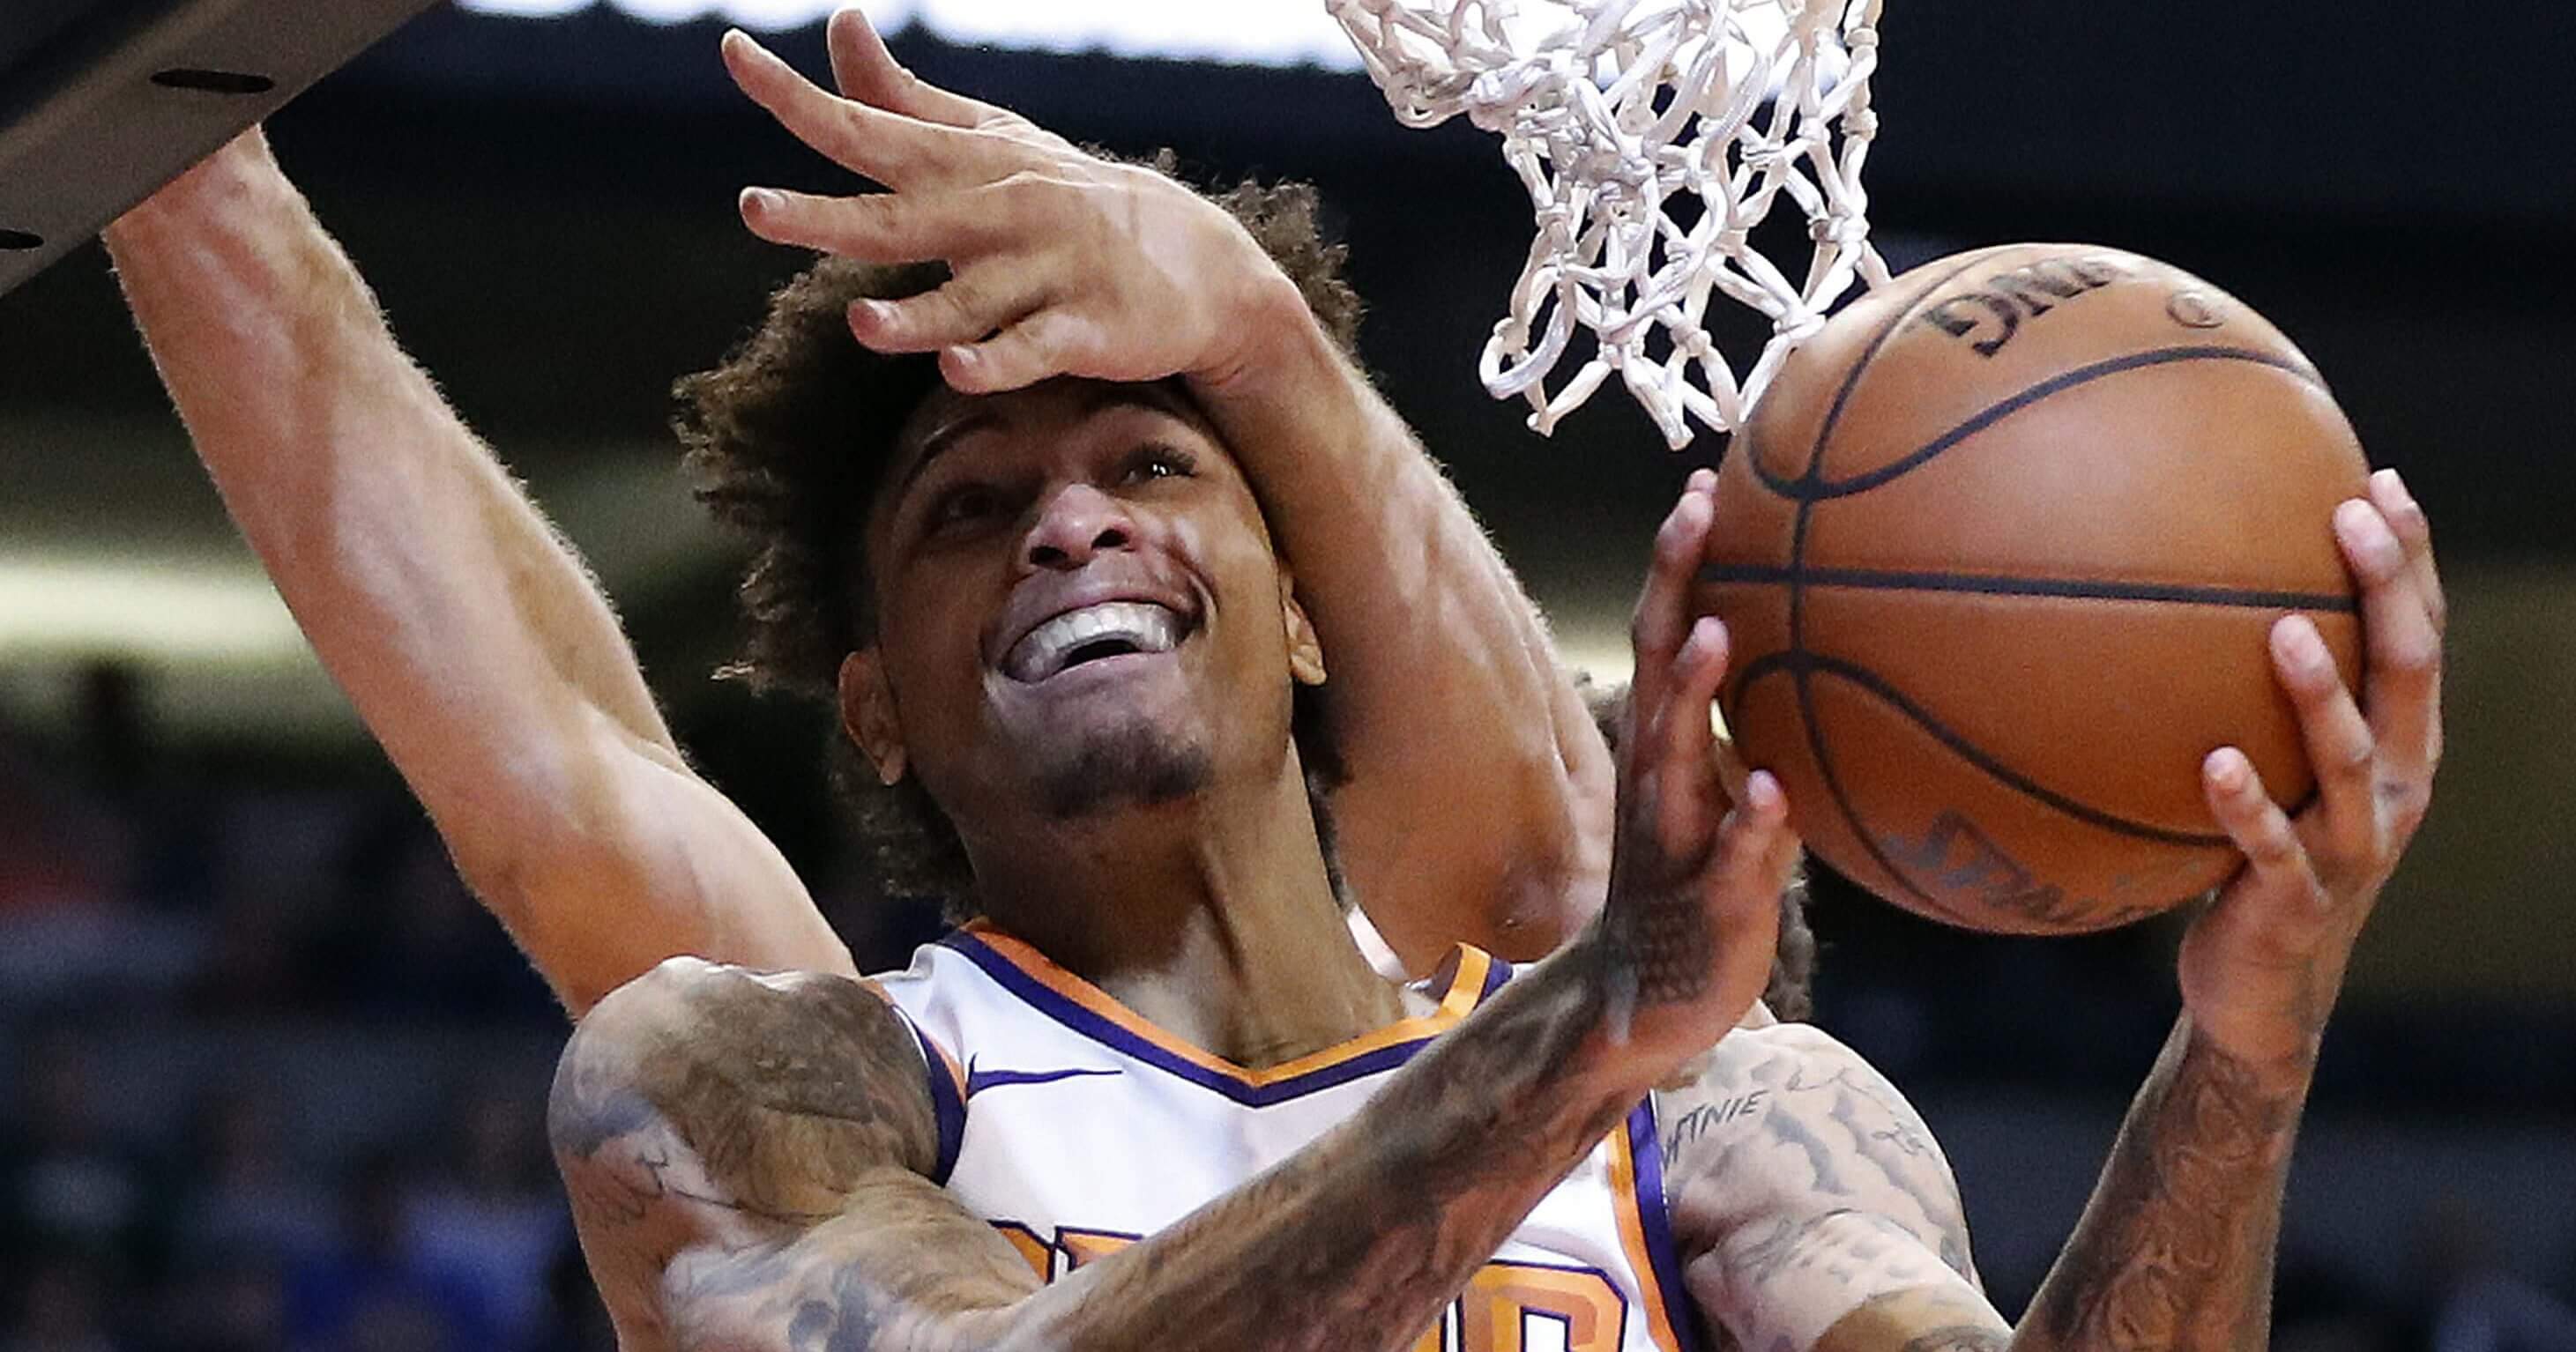 Phoenix Suns forward Kelly Oubre Jr. is fouled by Milwaukee Bucks center Brook Lopez during the second half of an NBA basketball game, Monday, March 4, 2019, in Phoenix